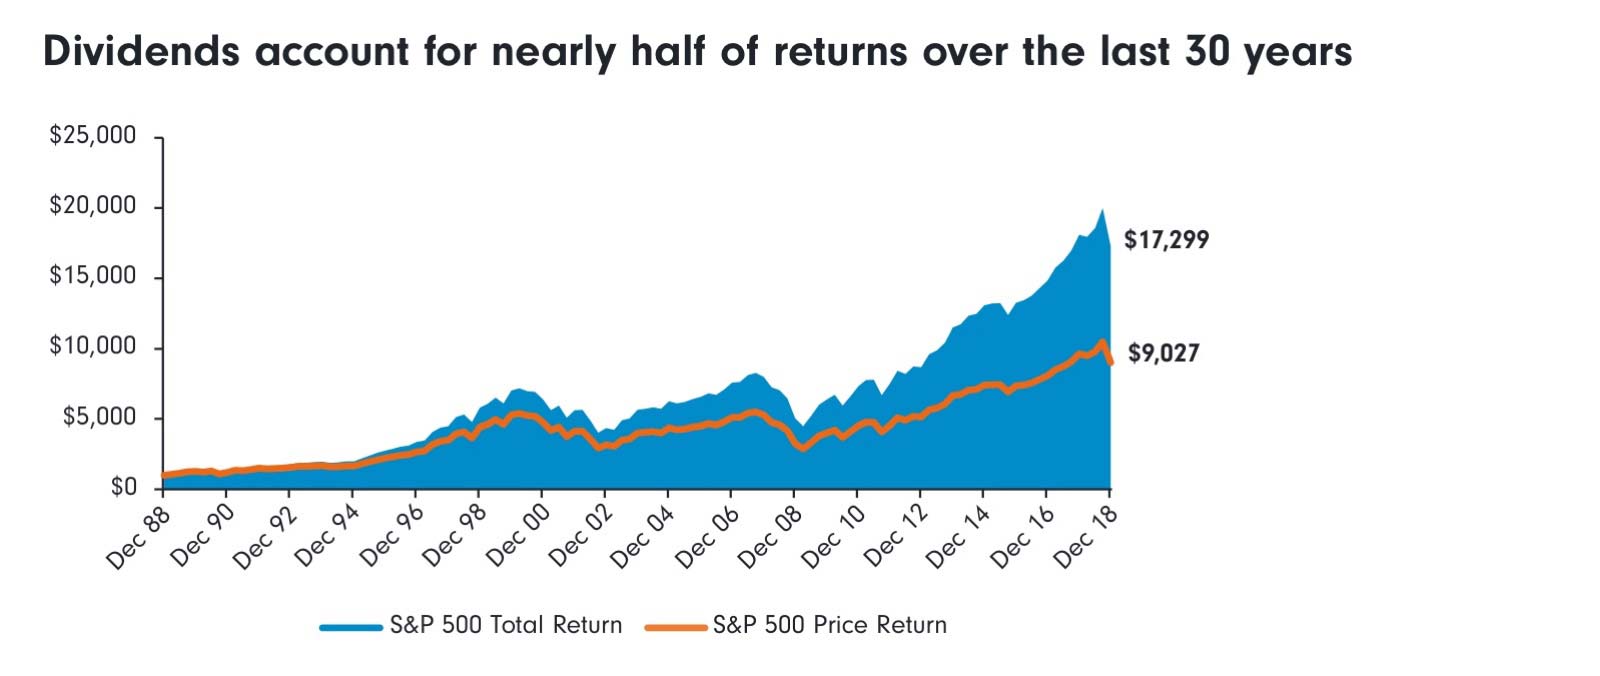 S&P 500 return over the last 30 years. Comparing S&P 500 total return and S&P 500 Price return.